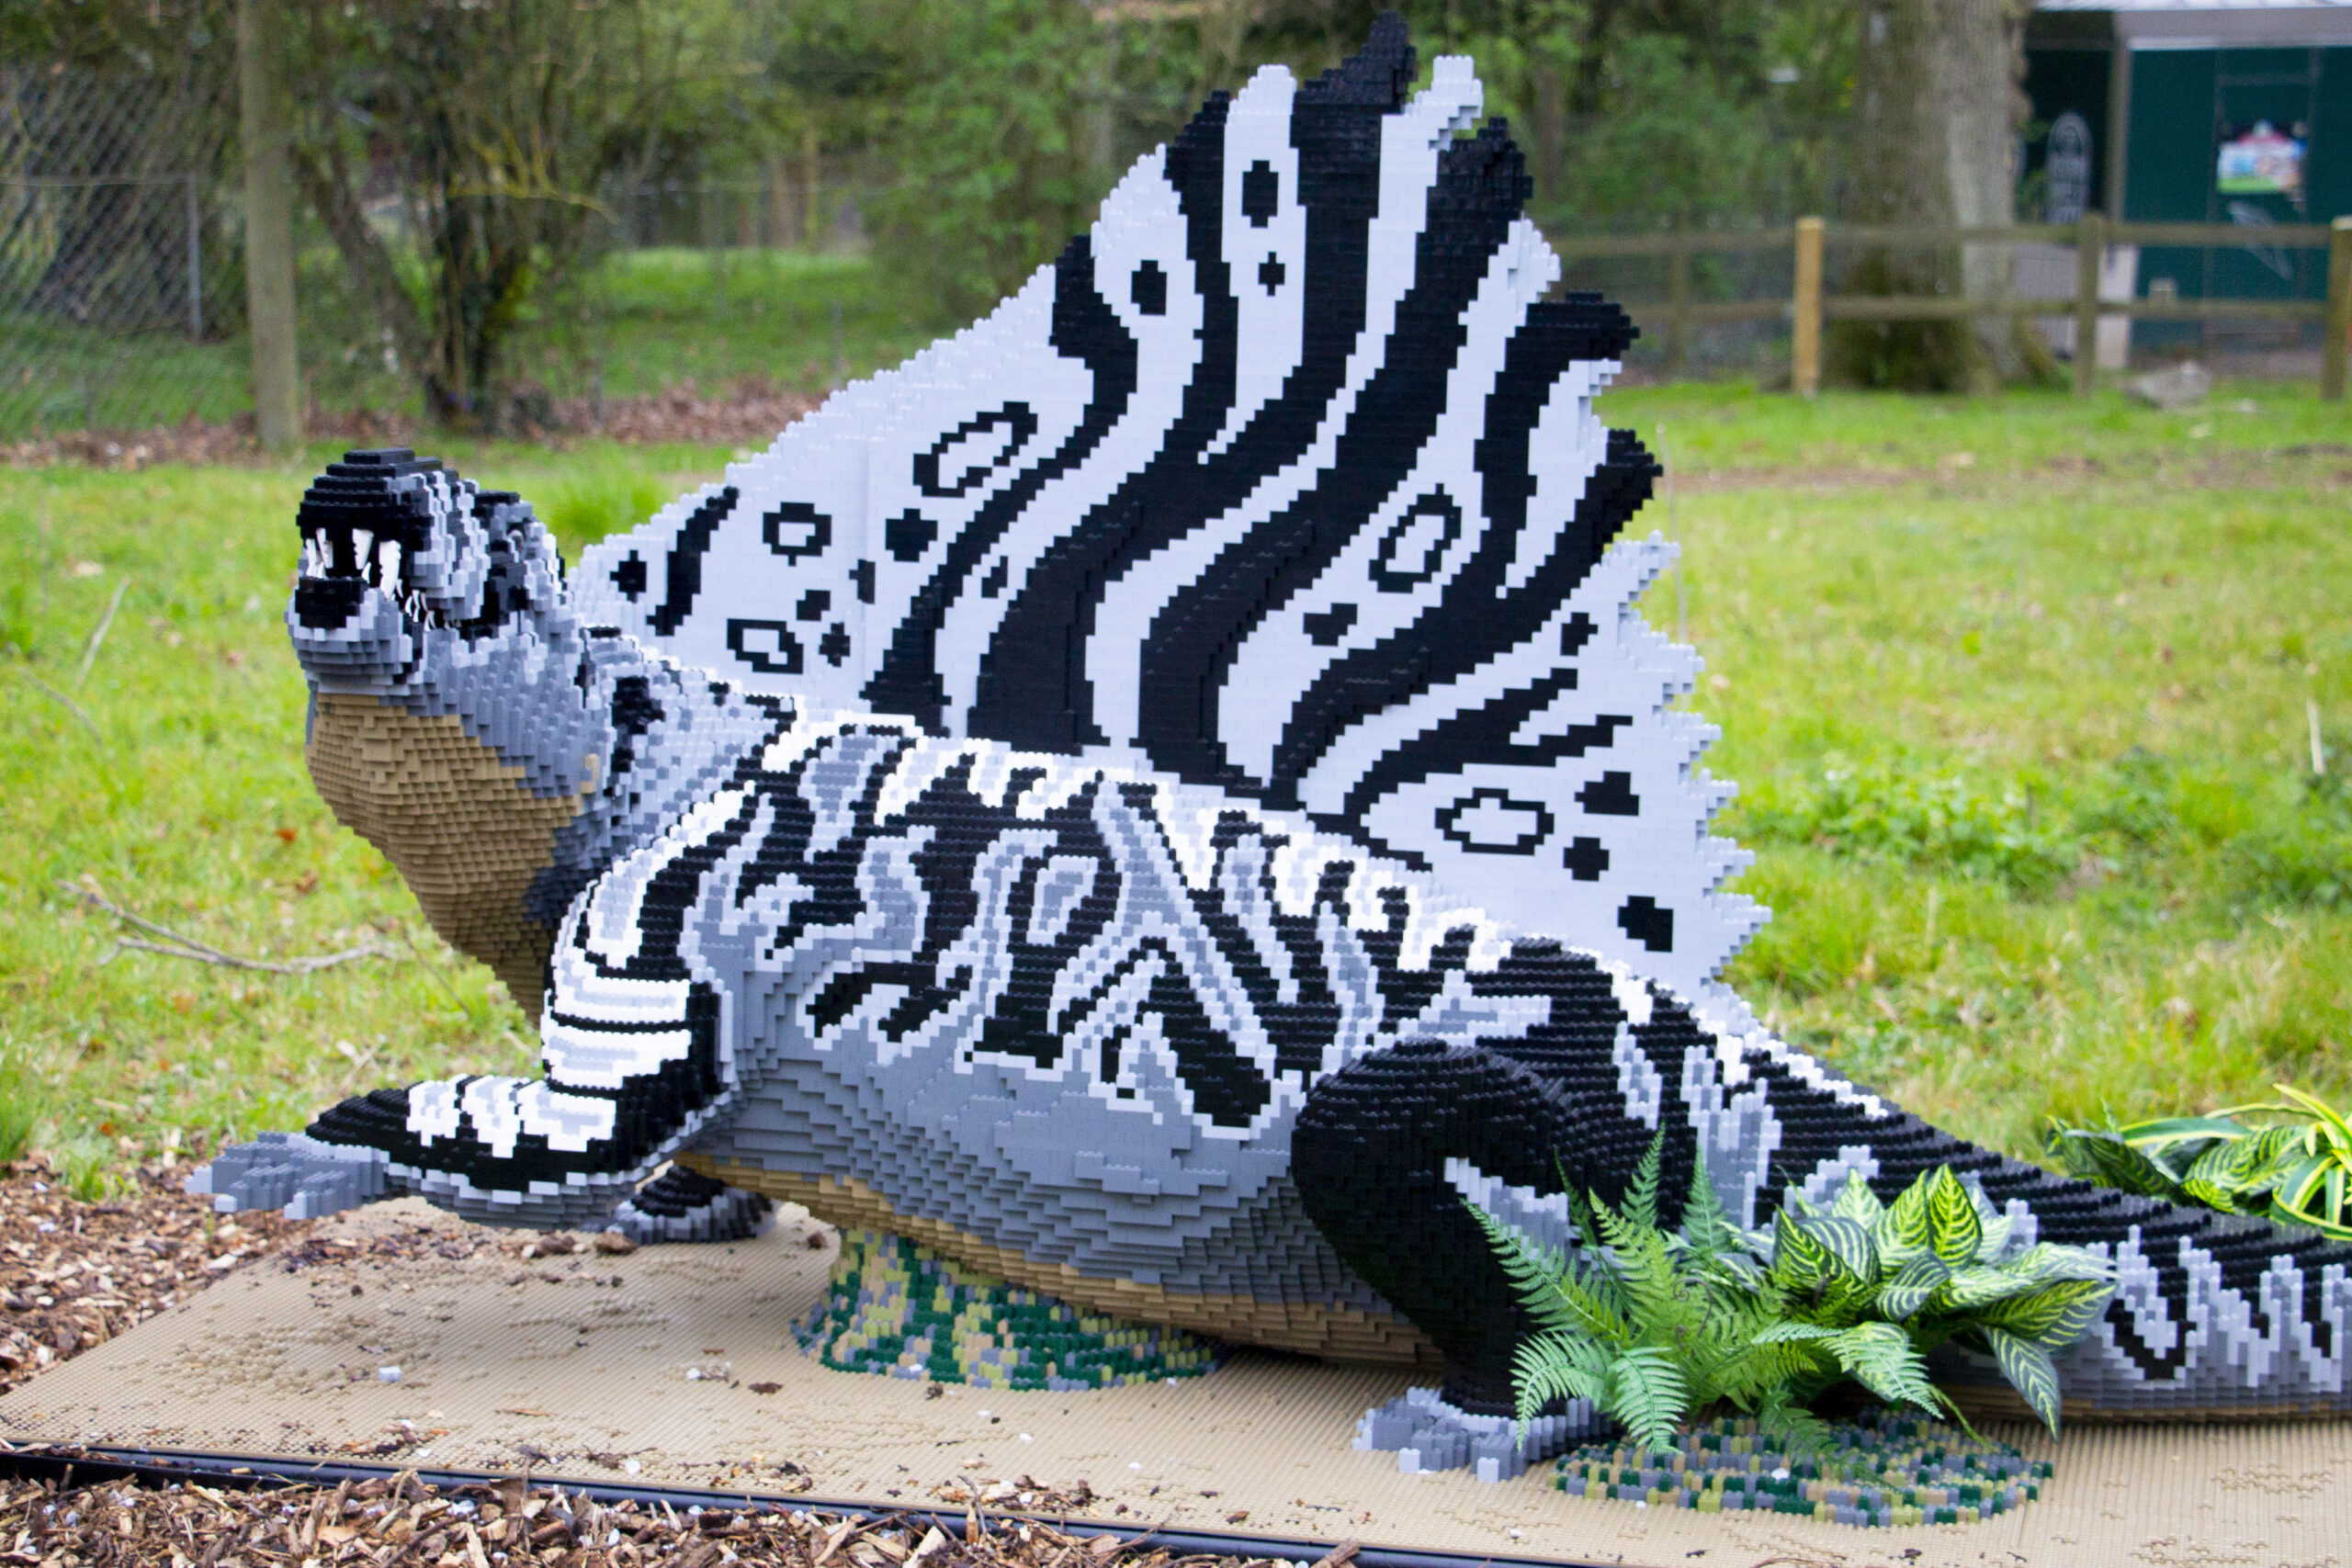 Southport will become DinoTown with a series of Bricklive Brickosaurs in an initiative by Southport BID. The Dimetrodon